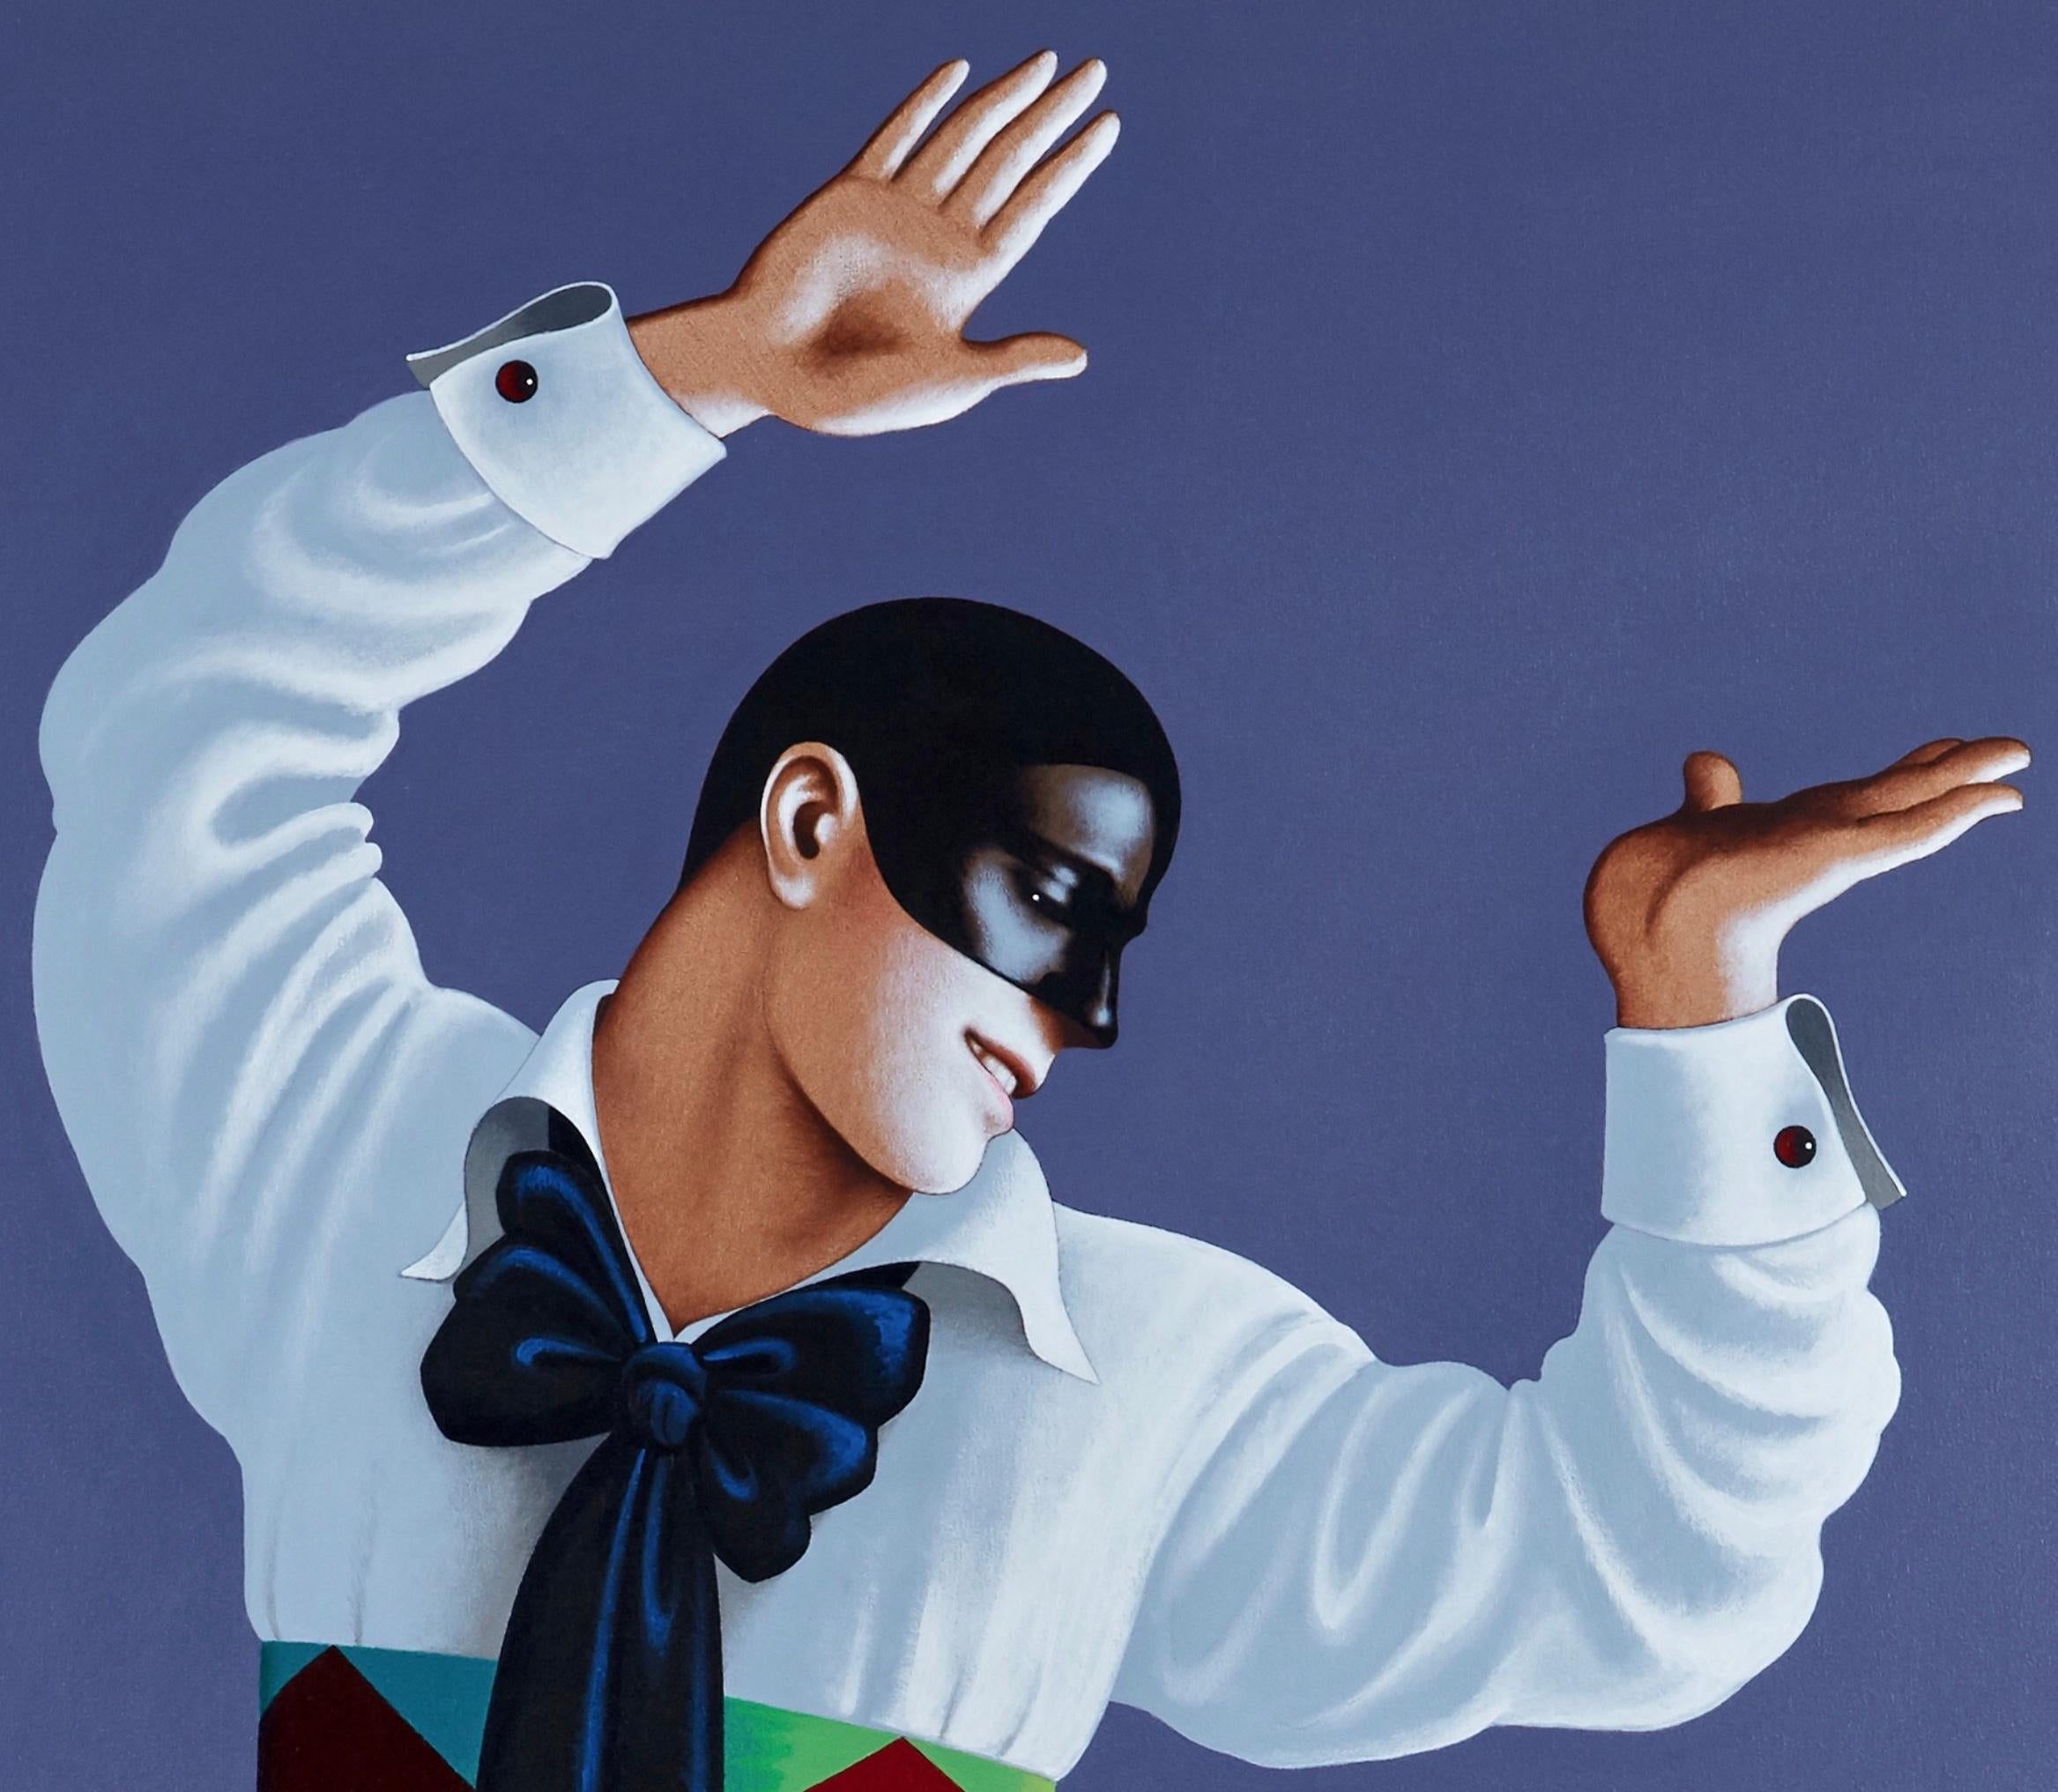 Nijinsky as Harlequin.
Original life-size painting by Lynn Curlee
The great dancer Vaslav Nijinsky in one of his most famous roles as Harlequin in Carnaval.

This painting was reproduced as an illustration in The Great Nijinsky, God of